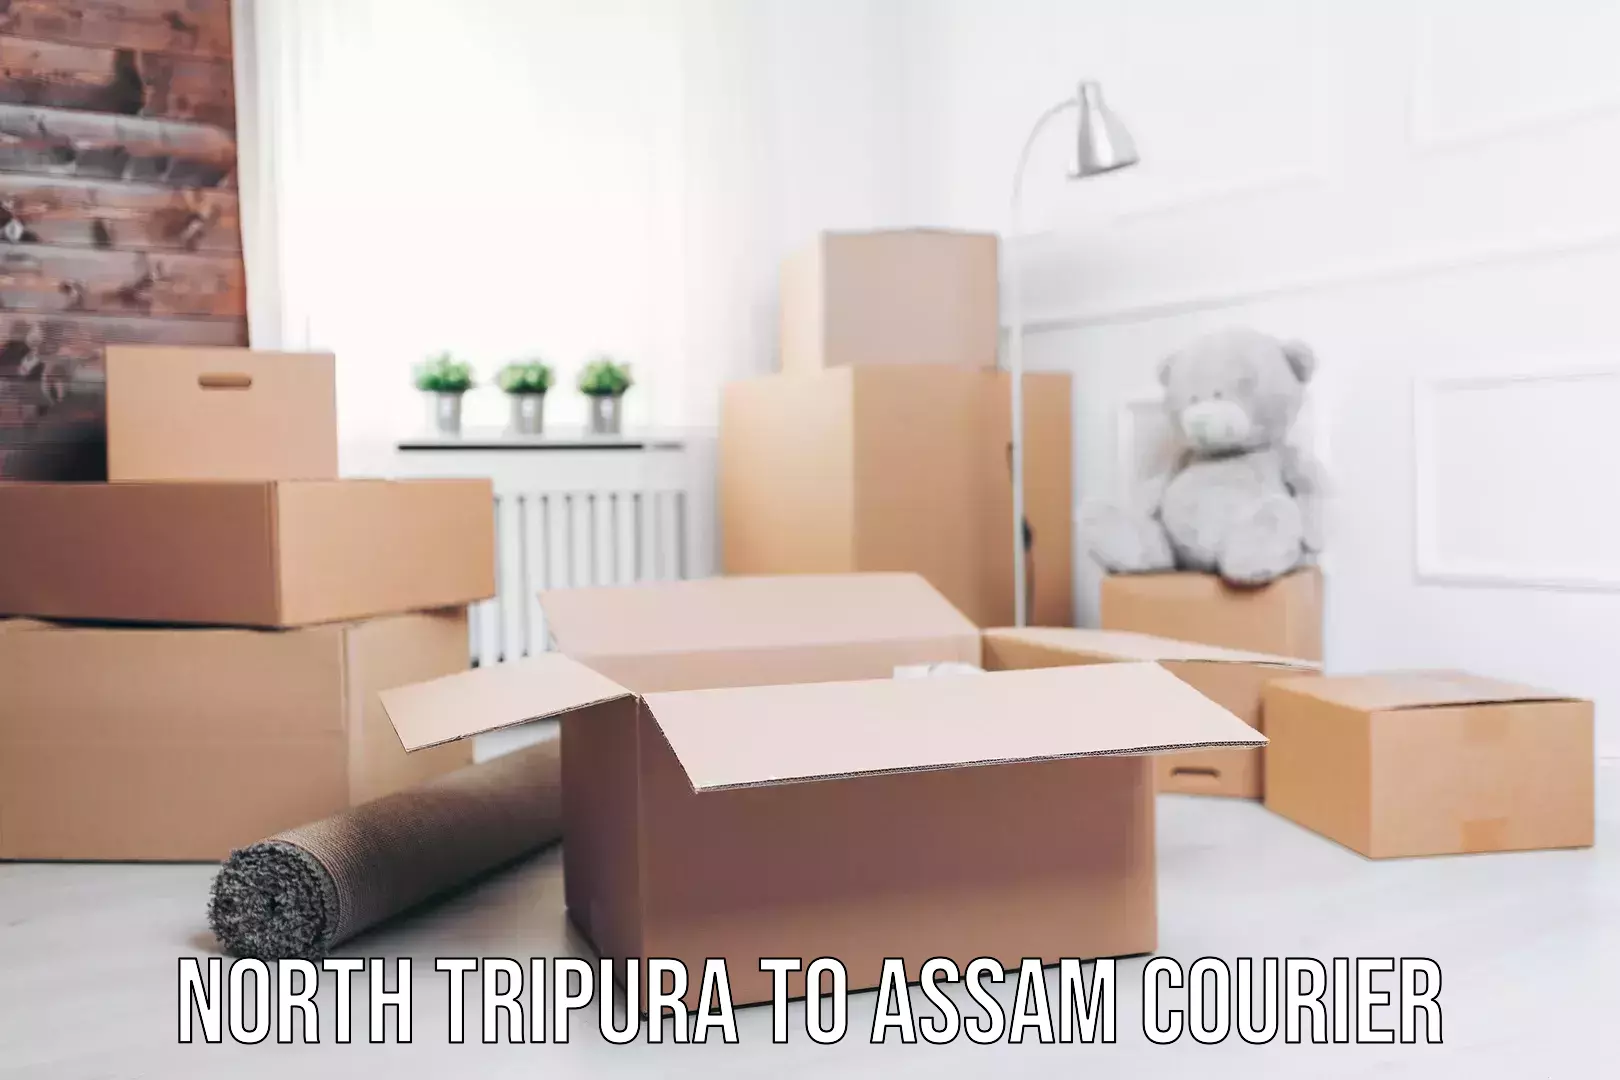 Multi-service courier options North Tripura to Assam